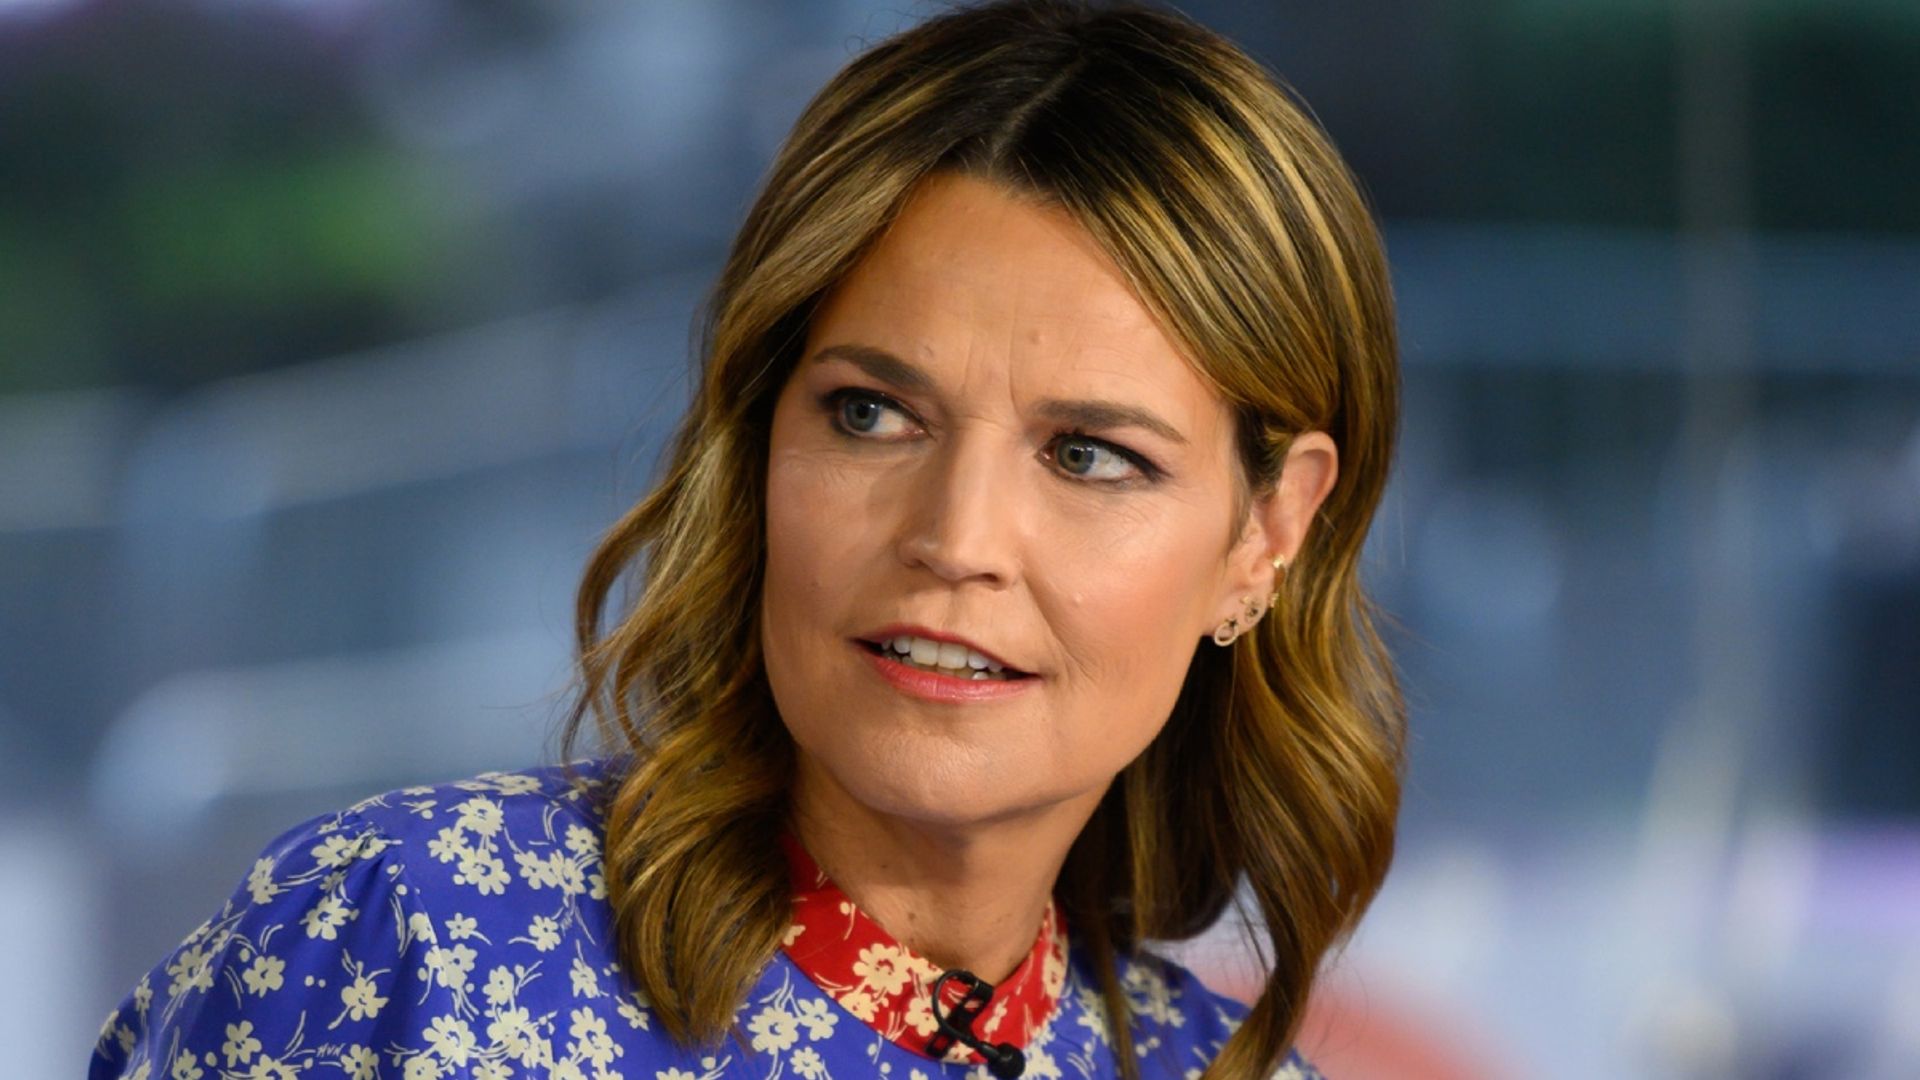 Savannah Guthrie's co-hosts unable to focus during Today segment – and she's left incredulous